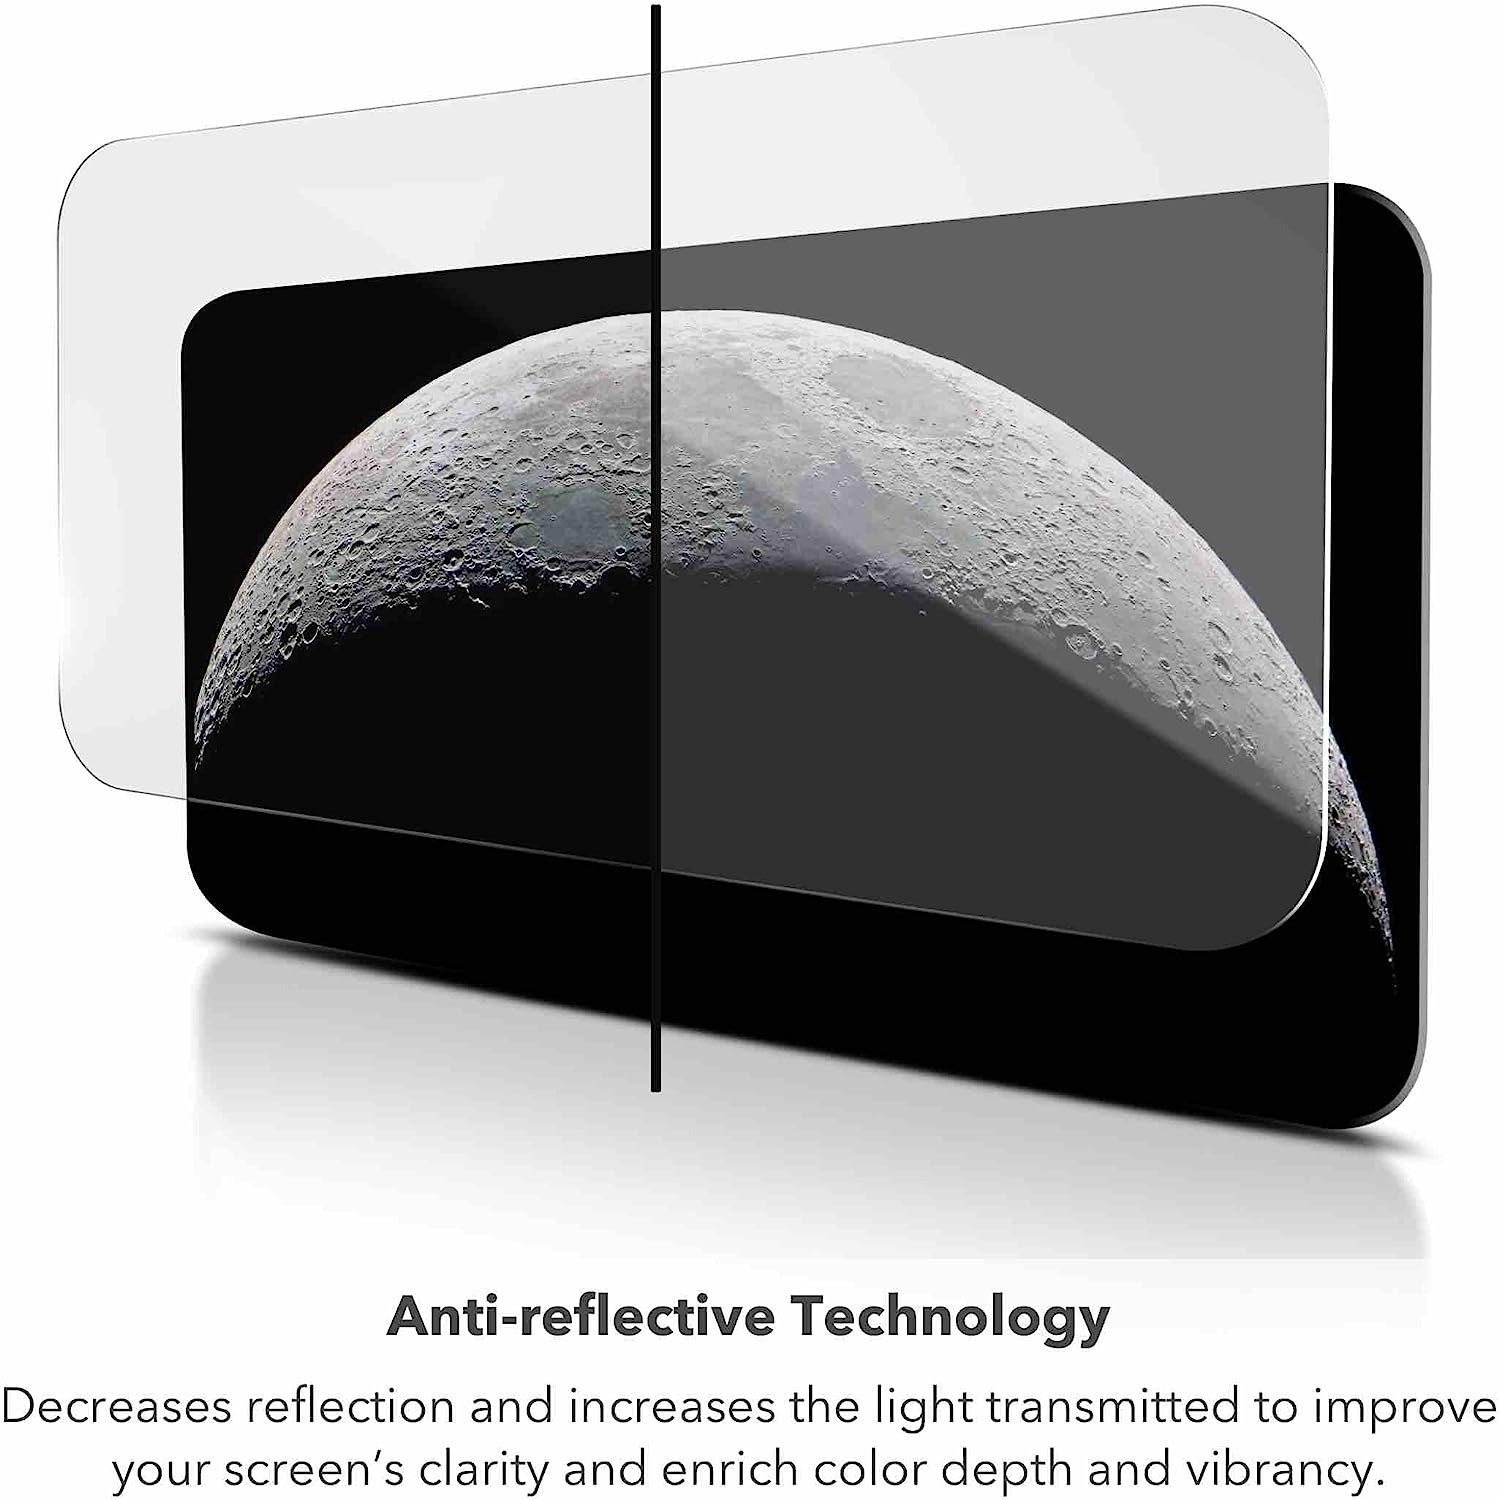 Anti-reflective Technology ||Decreases reflection and increases the light transmitted to improve your screen's clarity and enrich color depth and vibrancy.